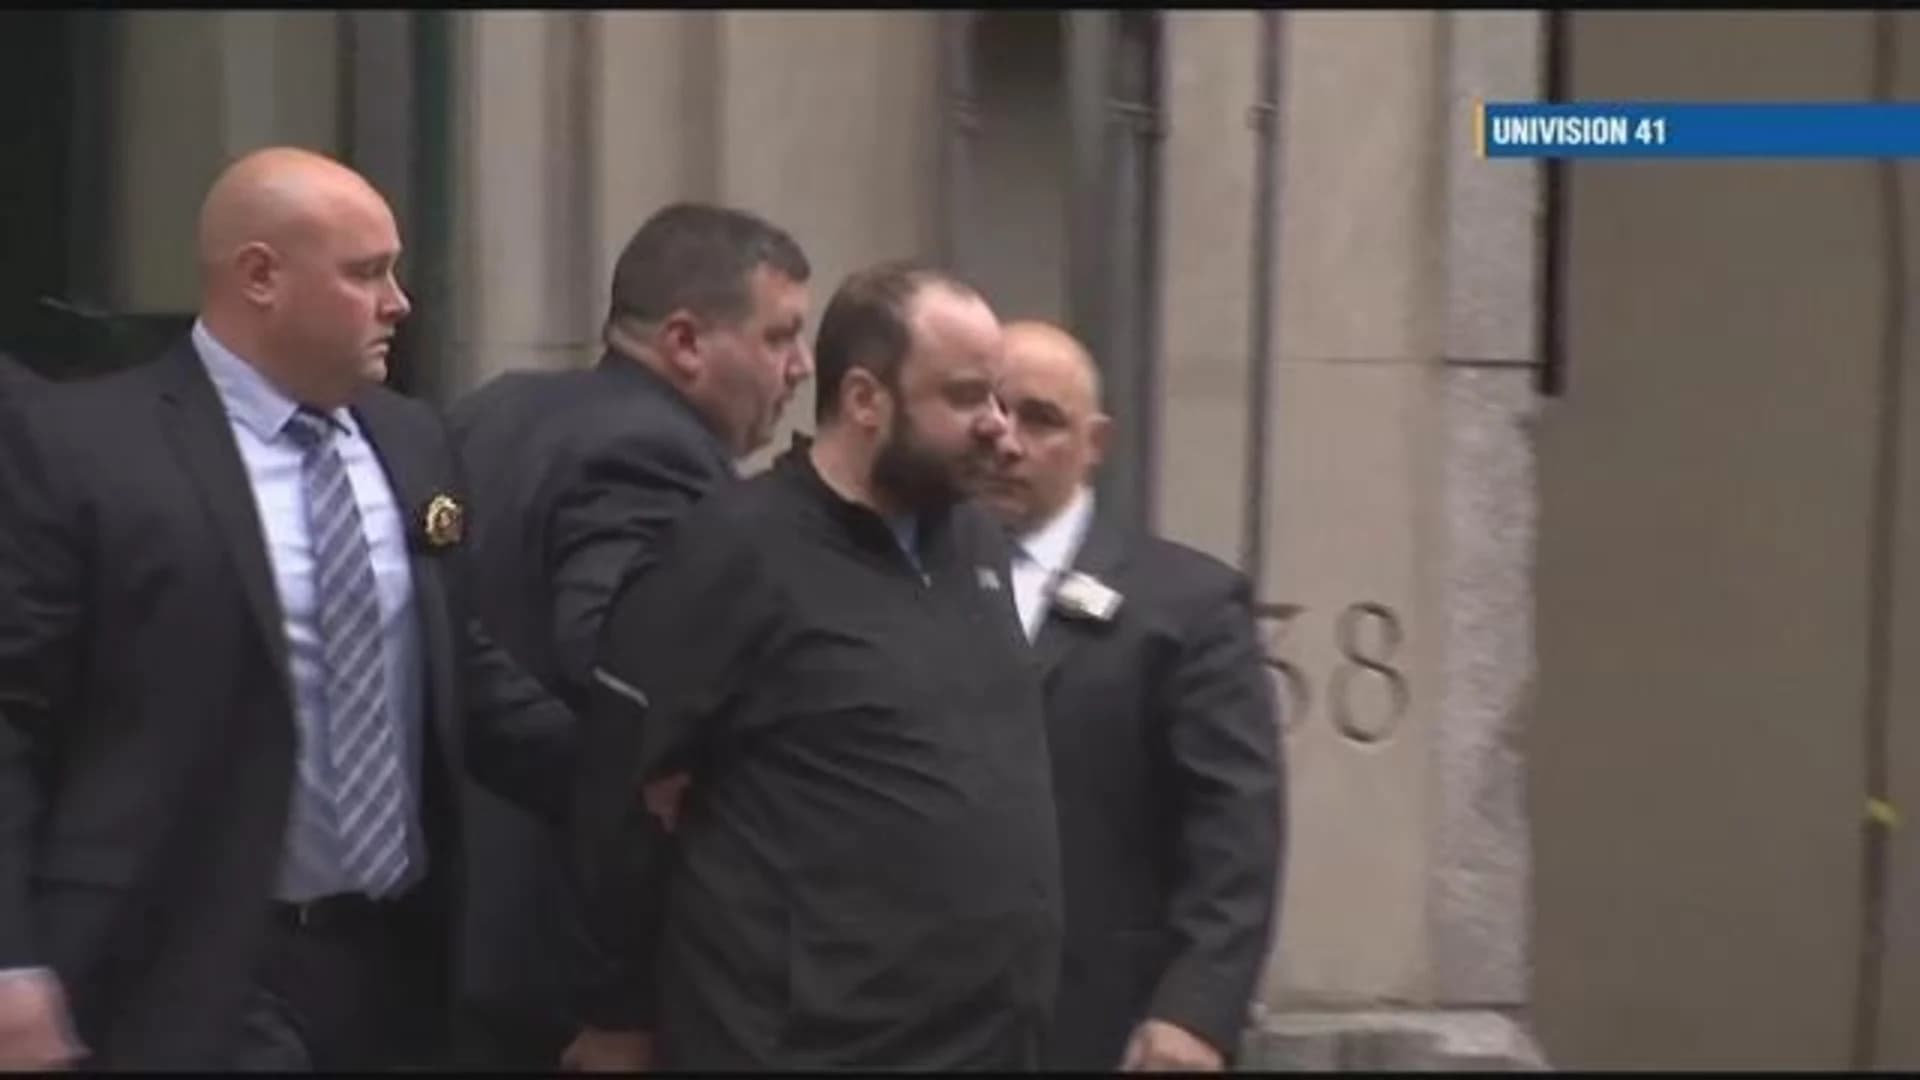 NJ man arrested at St. Patrick’s Cathedral has ties to Bronx, Brooklyn